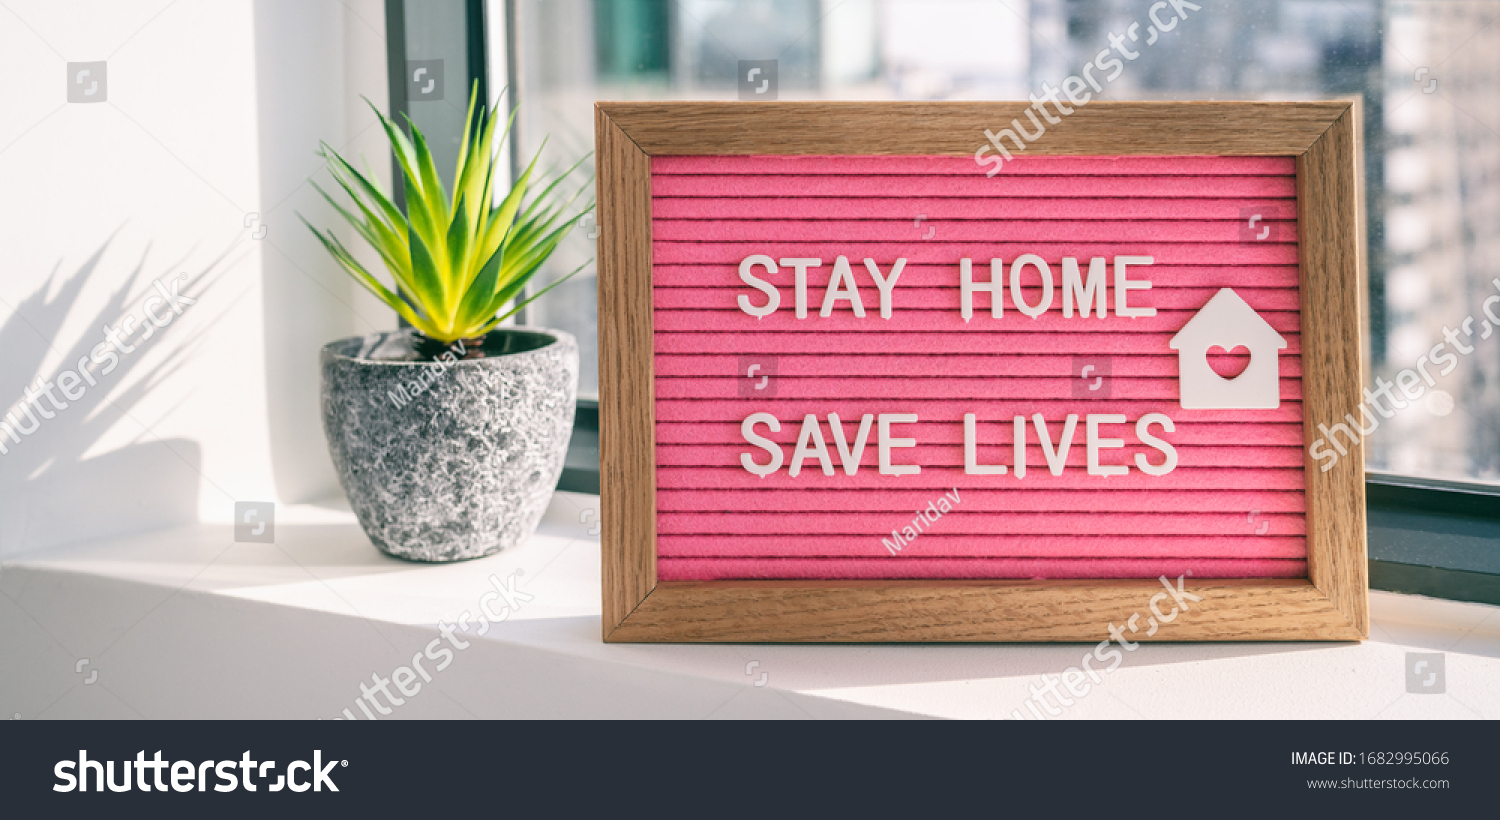 COVID-19 Coronavirus "STAY HOME SAVE LIVES" viral social media message sign with text for social distancing awareness. COVID-19 staying at home concept. Flatten the curve. #1682995066